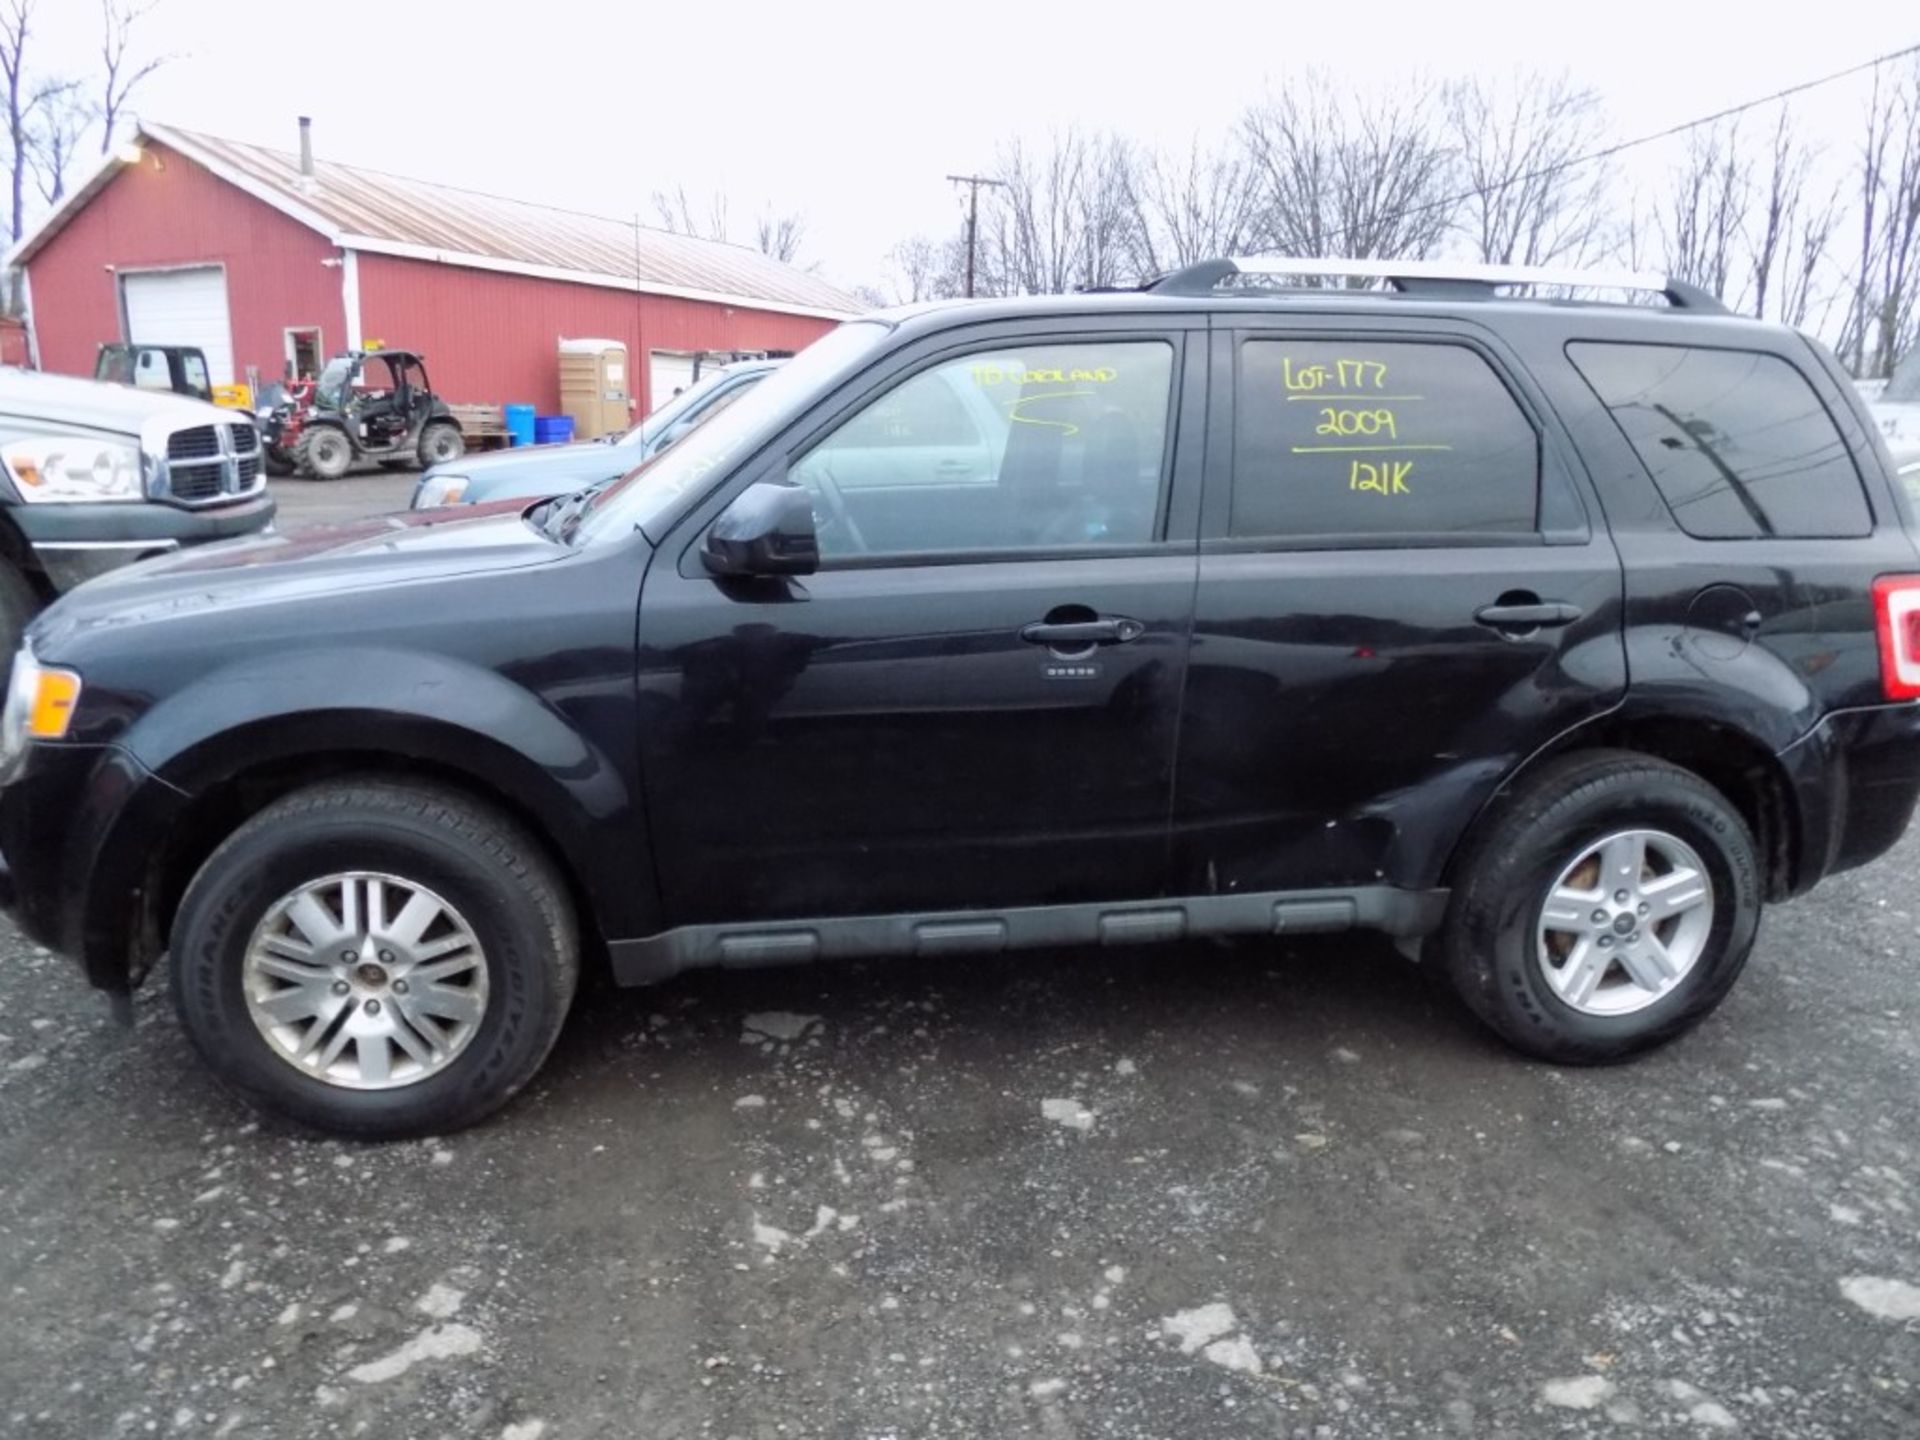 2009 Ford Escape Limited, 4x4, Black, Leather, Sunroof, 121,531 Miles, VIN#: 1FMCU94G09KC66421, - Image 2 of 12